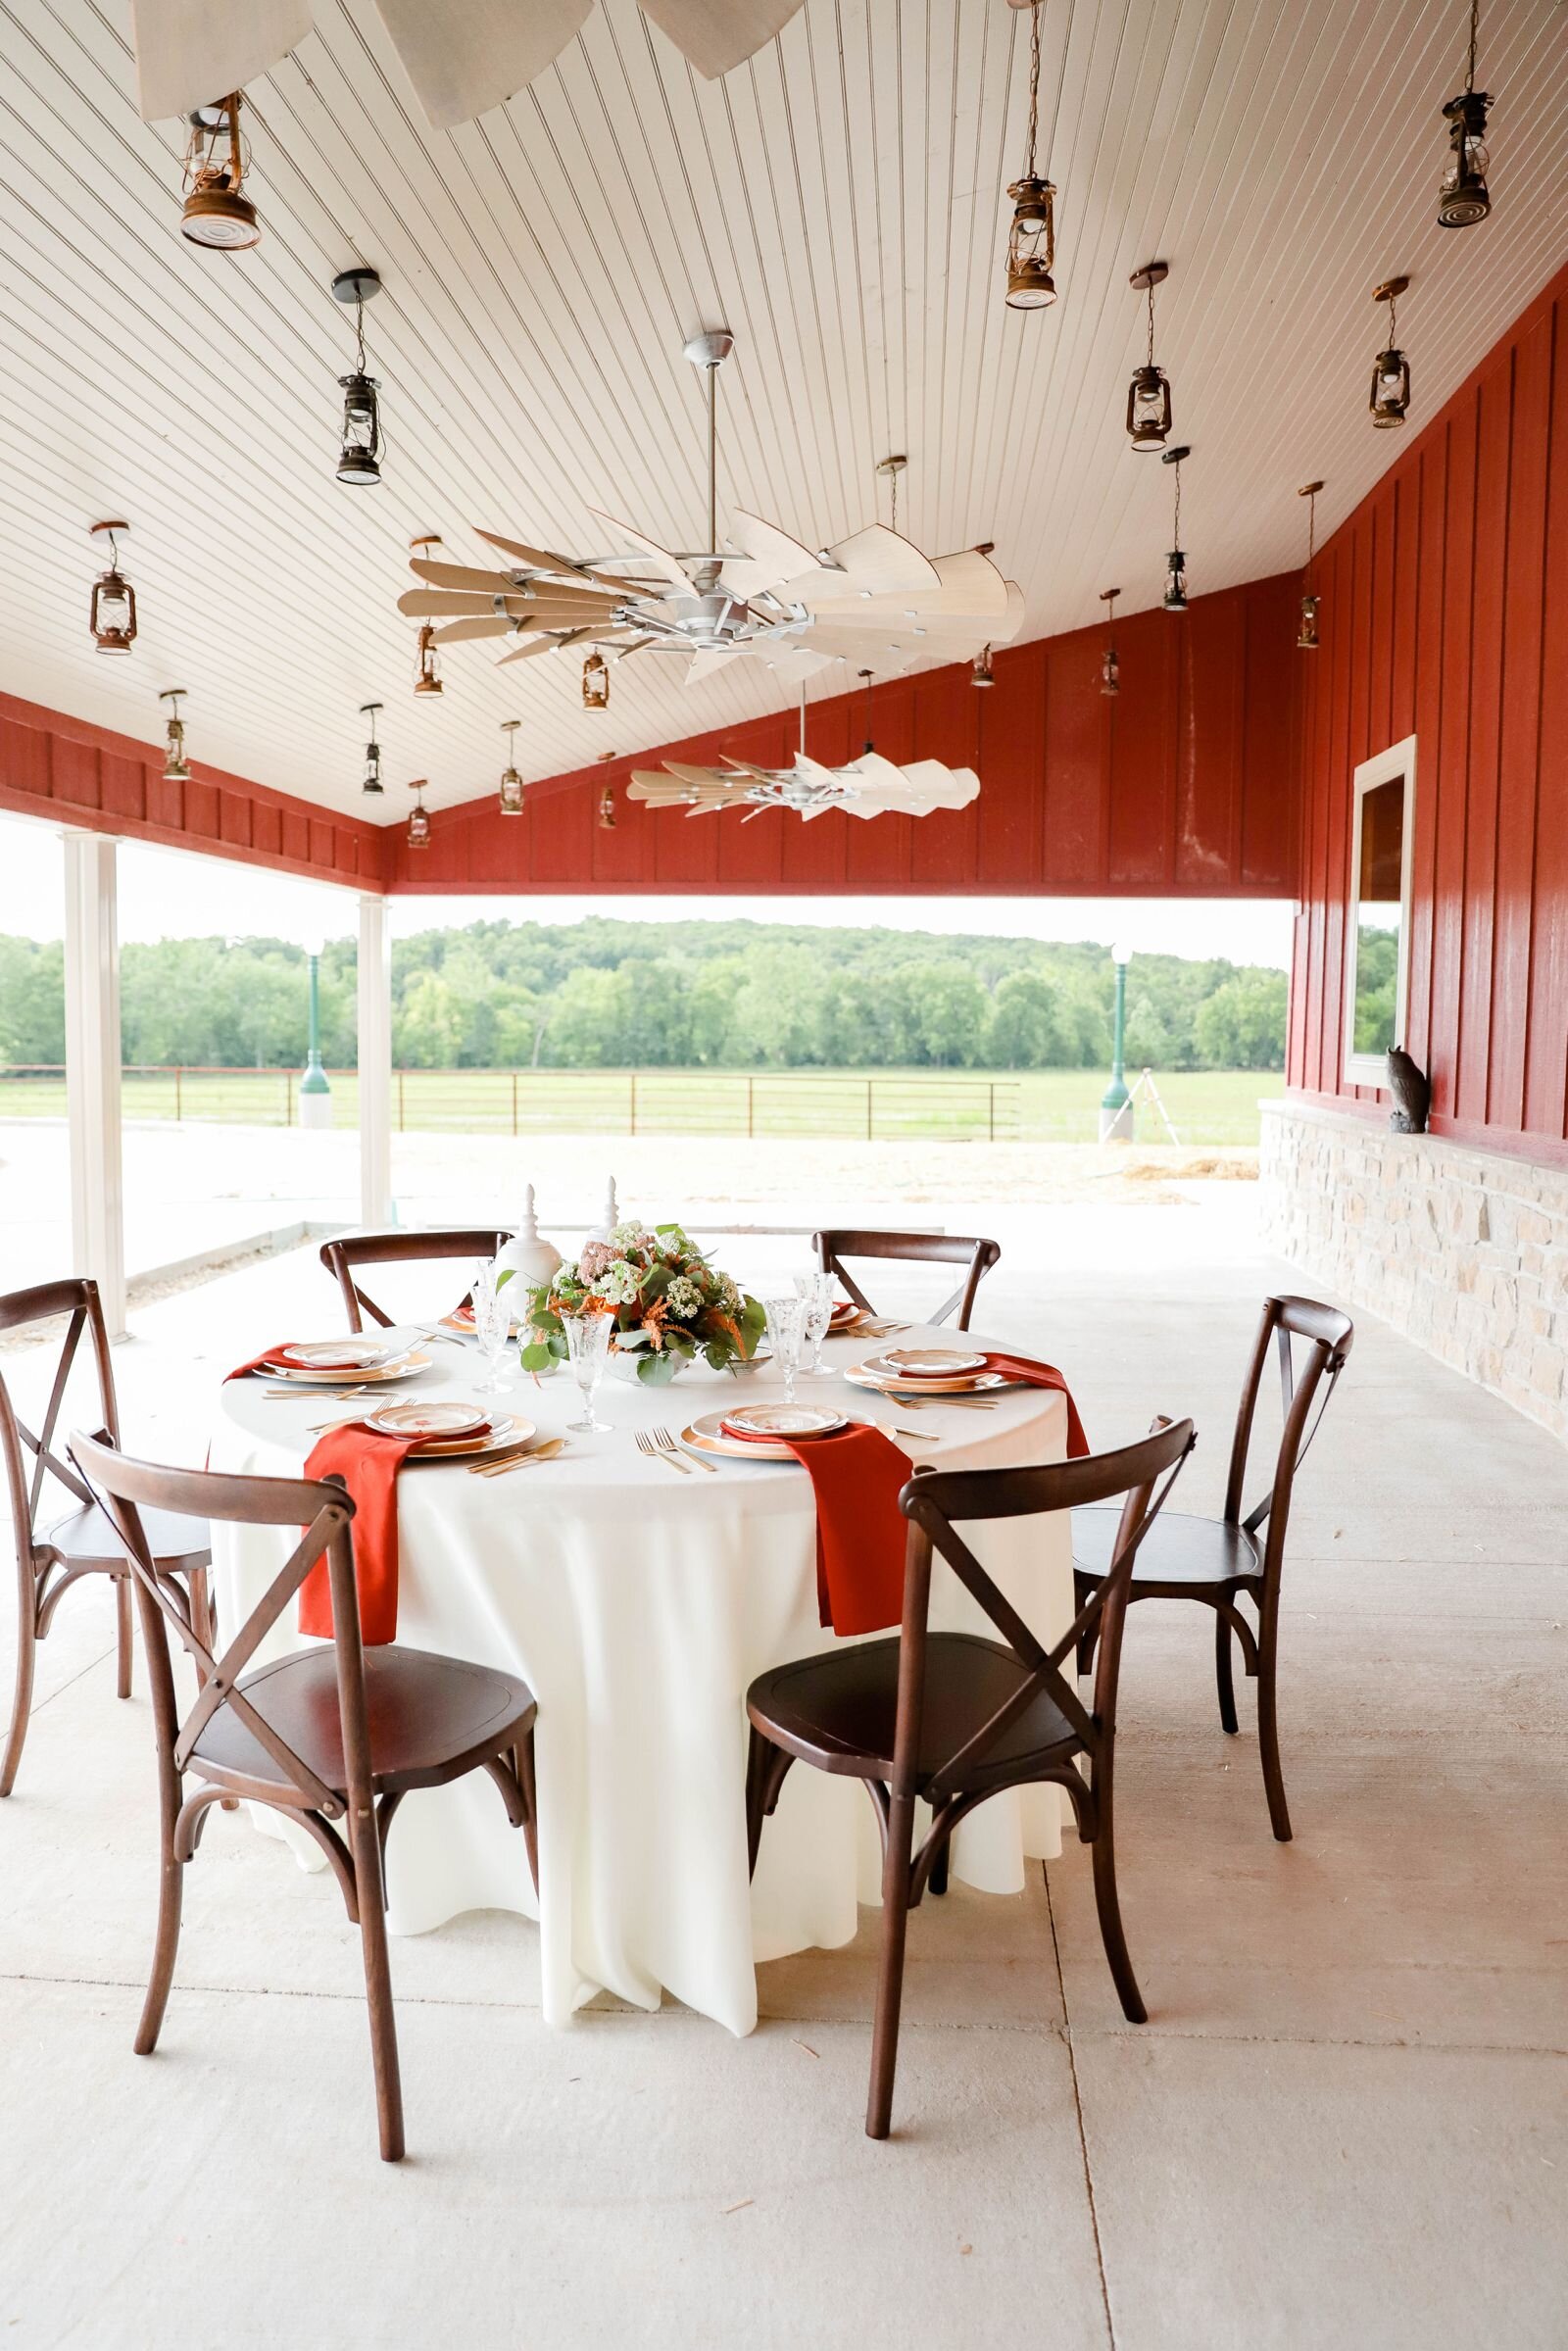 missouri_barn_wedding_venue_photographer_videographer_photo_engagement_stl_st_james_nature_red_oak_valley_owensville_natural_light_photography_image_photos_mo_farm_barn_outdoor_st_james_mo_light_southern_bright_cheerful_0089.jpg